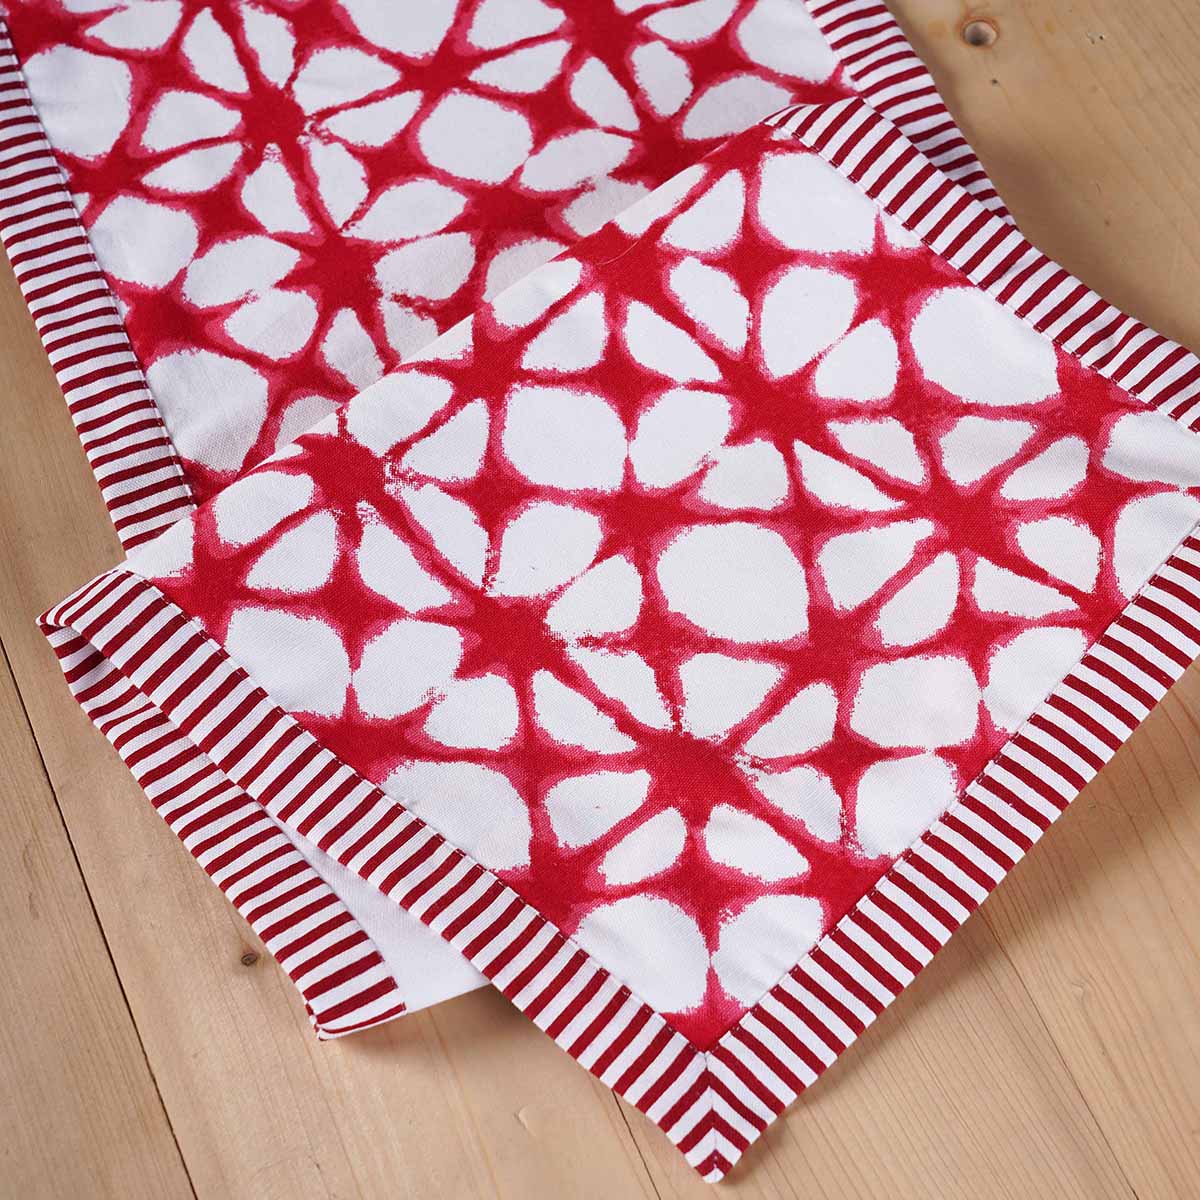 Red table runner, tie dye prism print, red stripe border, sizes available